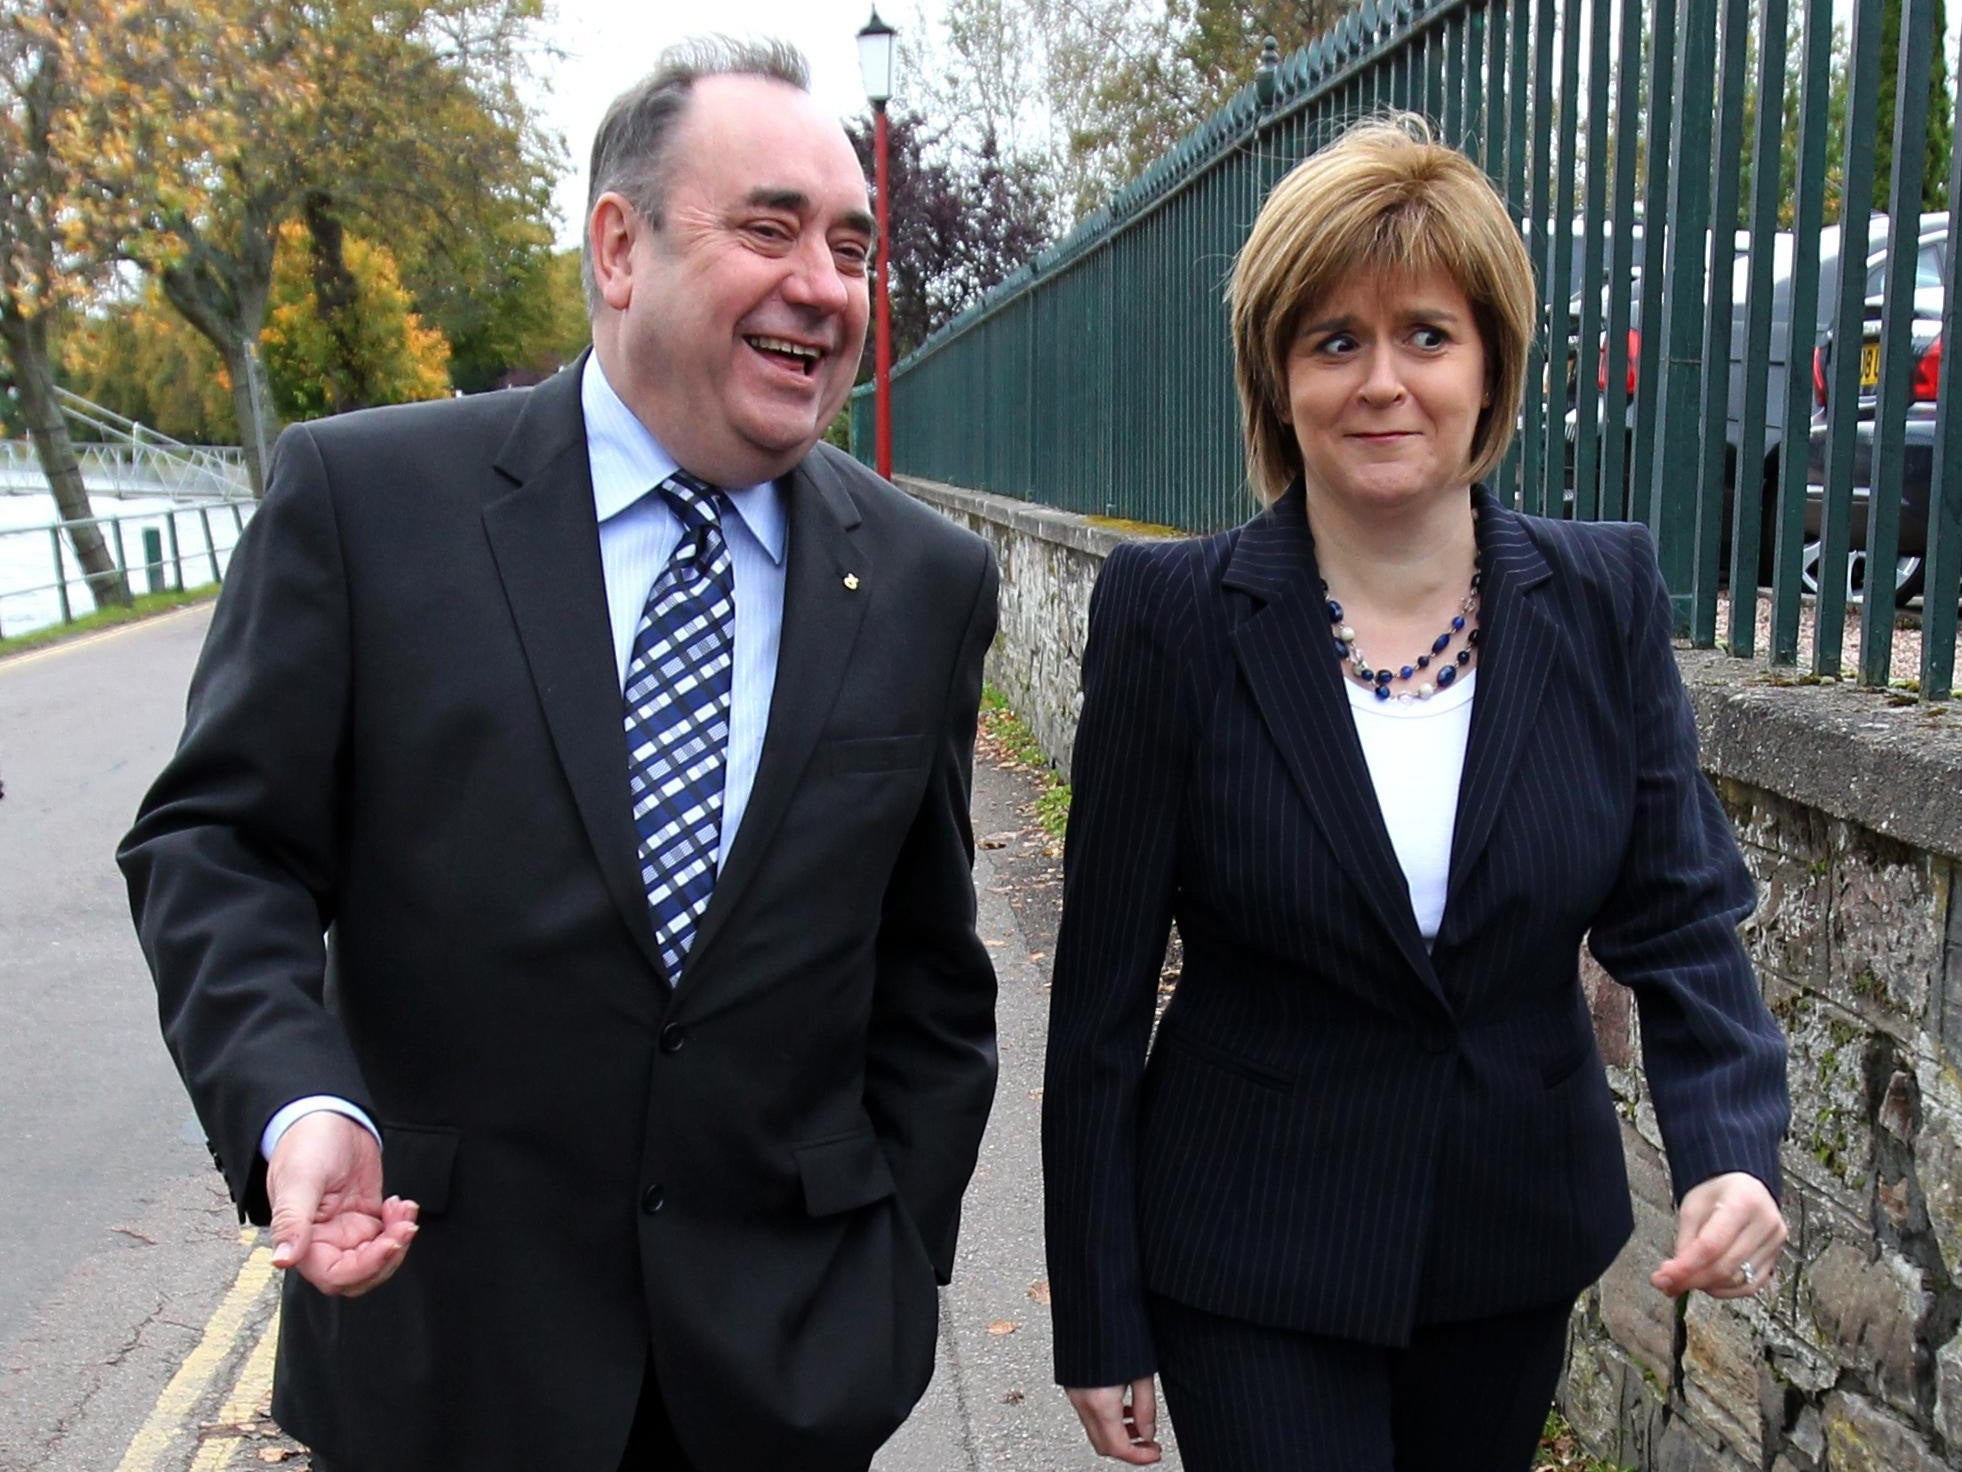 Salmond and Sturgeon campaigning in 2011